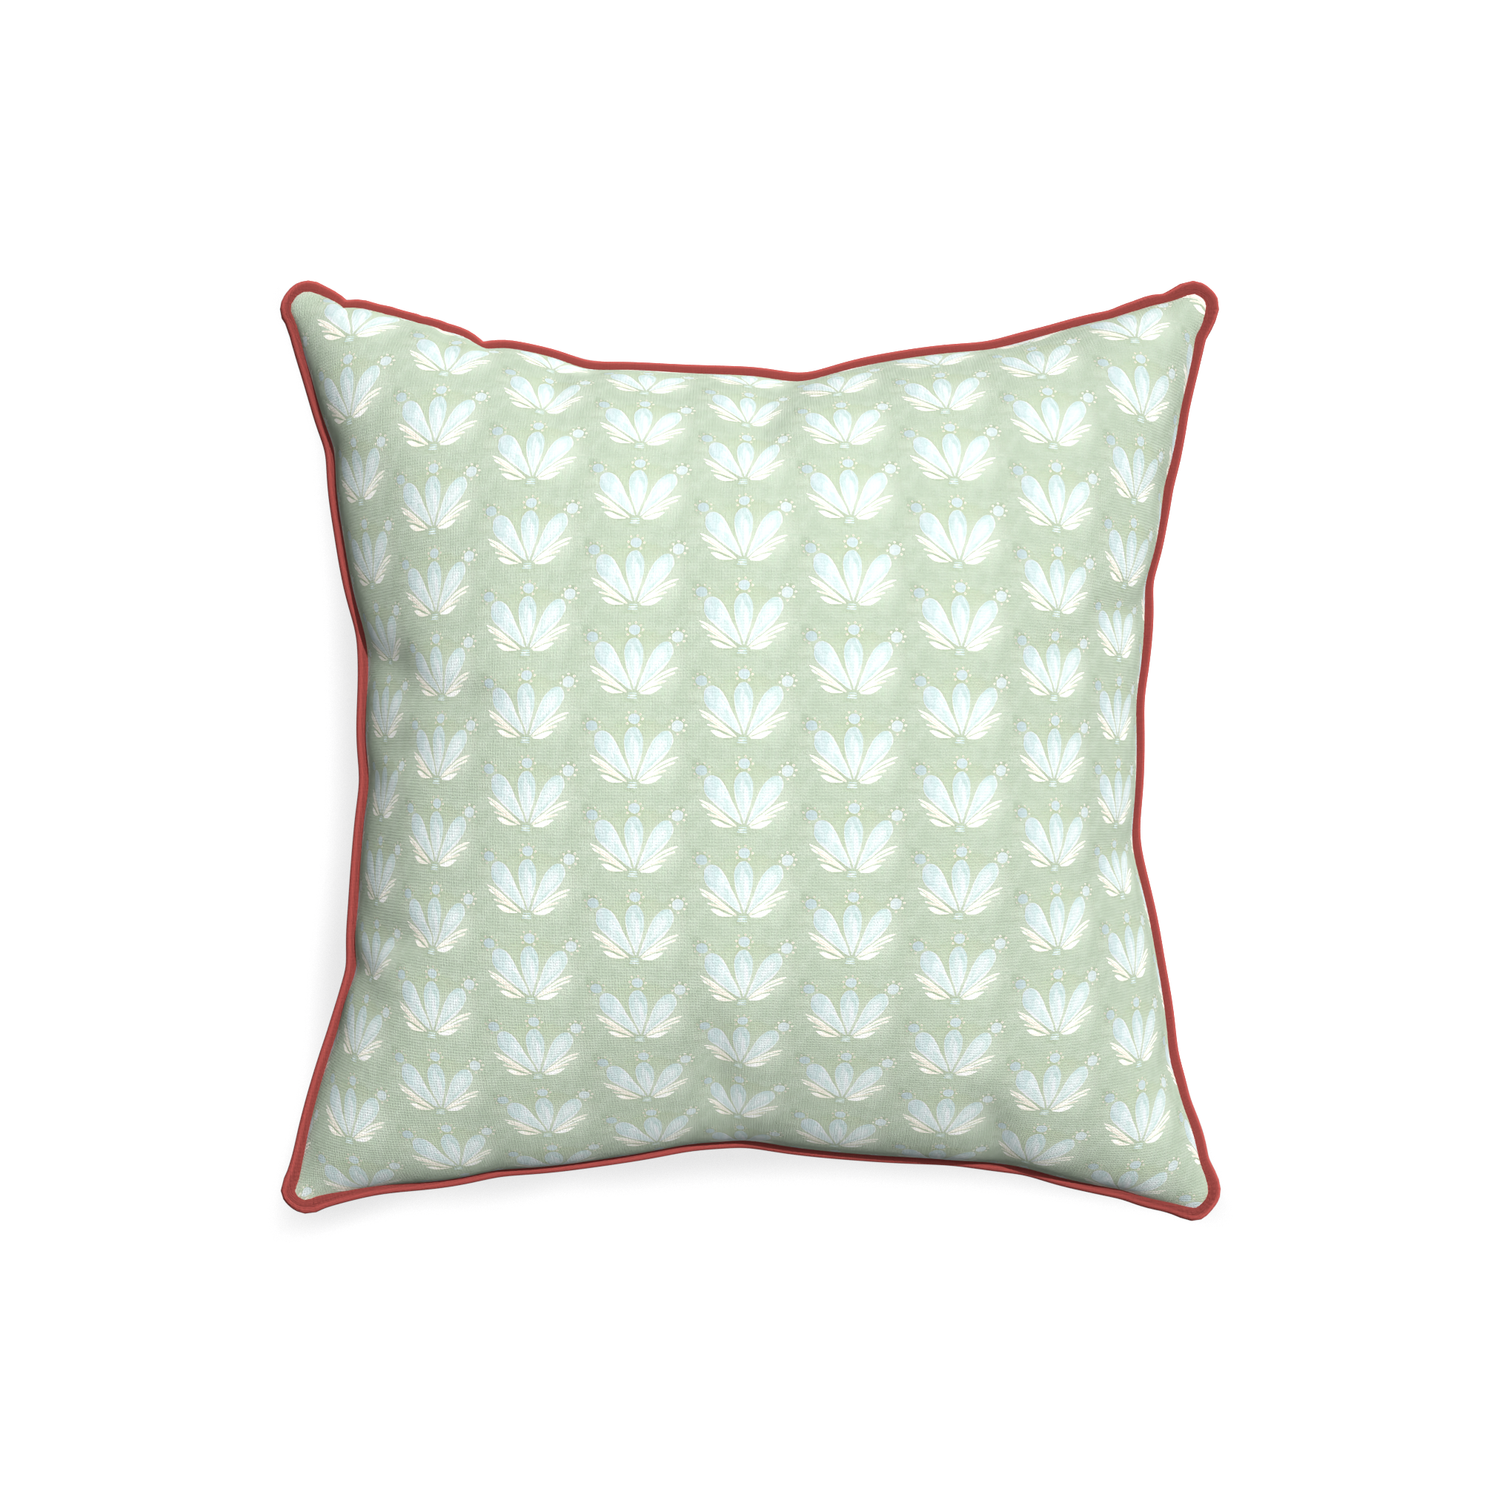 20-square serena sea salt custom blue & green floral drop repeatpillow with c piping on white background